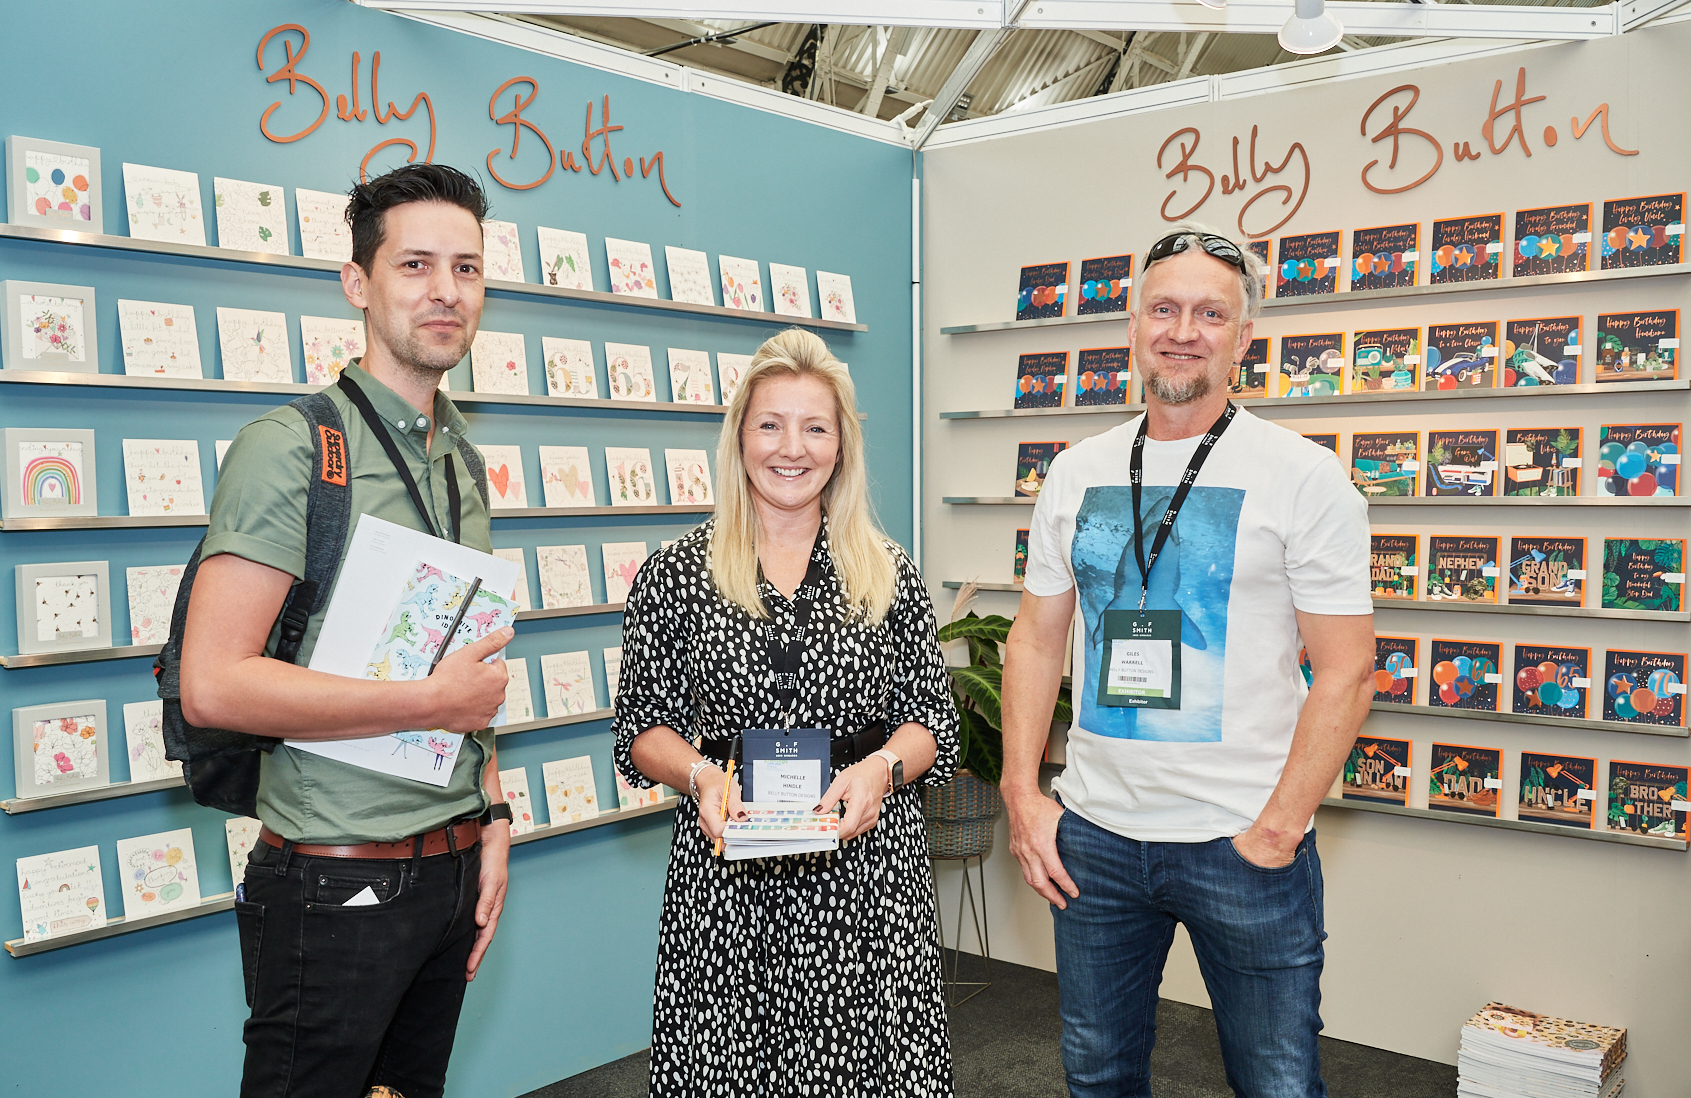 Above: (left) Blue Diamond Group’s Nick Dale on the Belly Button Designs’ stand at this year’s show with Michelle Hindle and Giles Warrell.